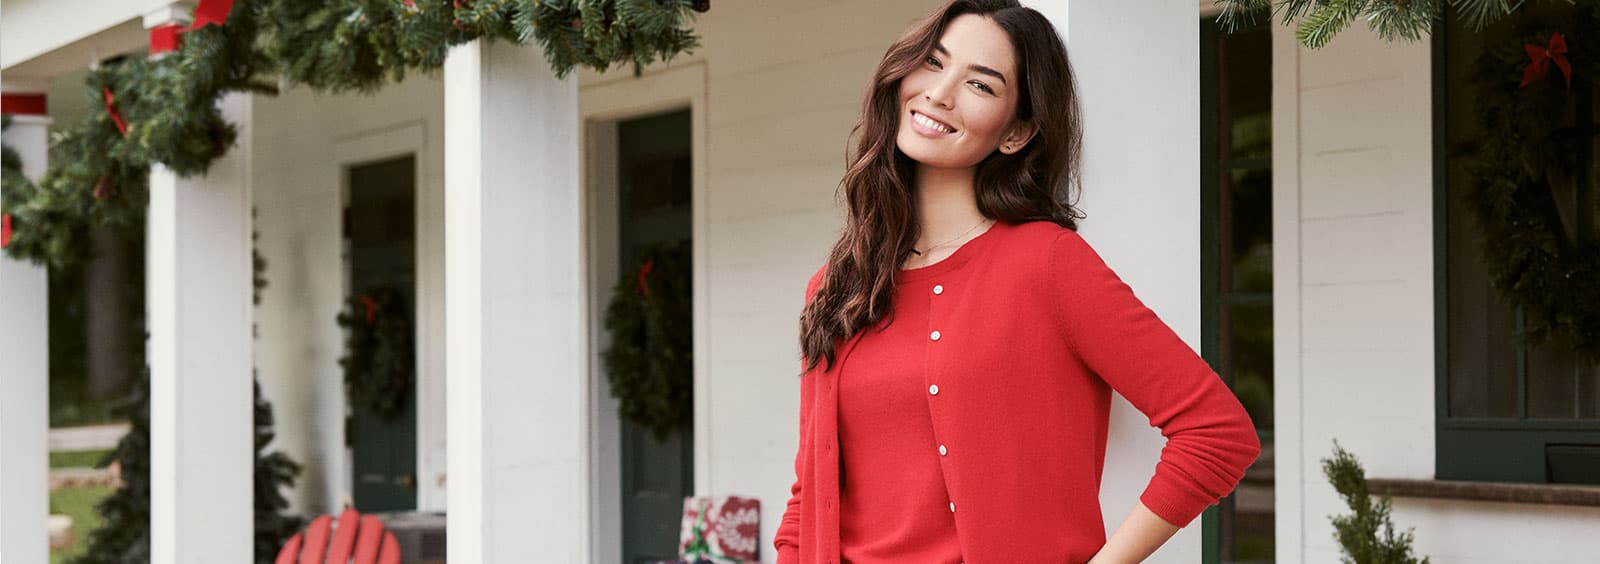 Best Sweaters to Wear on Chilly Nights | Lands' End